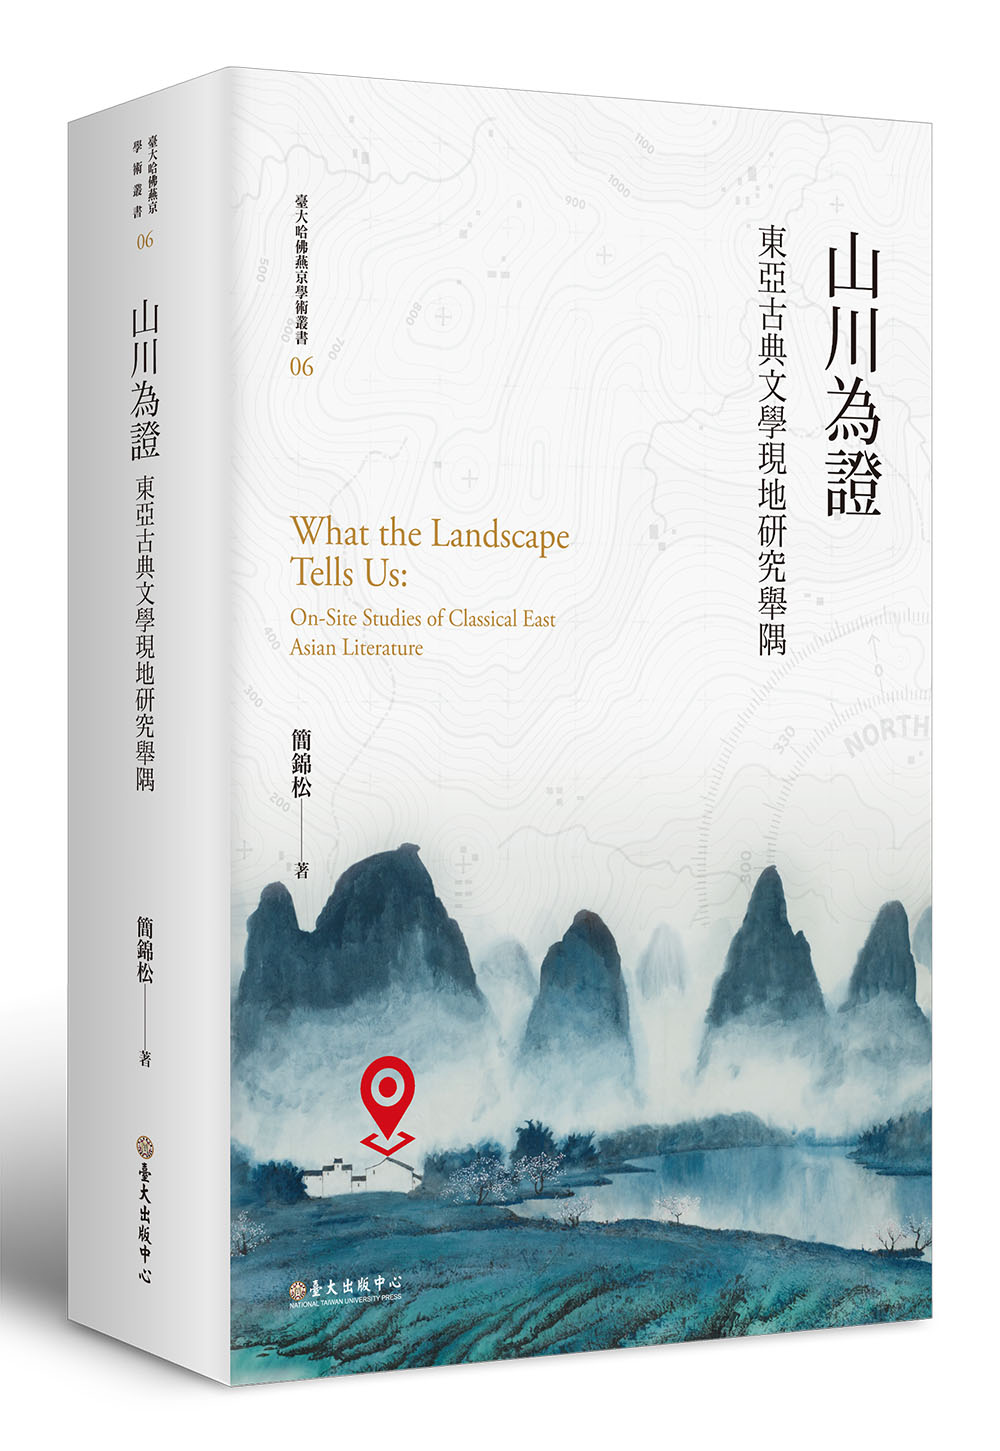 What the Landscape Tells Us: On-Site Studies of Classical East Asian Literature (limited edition hardback)